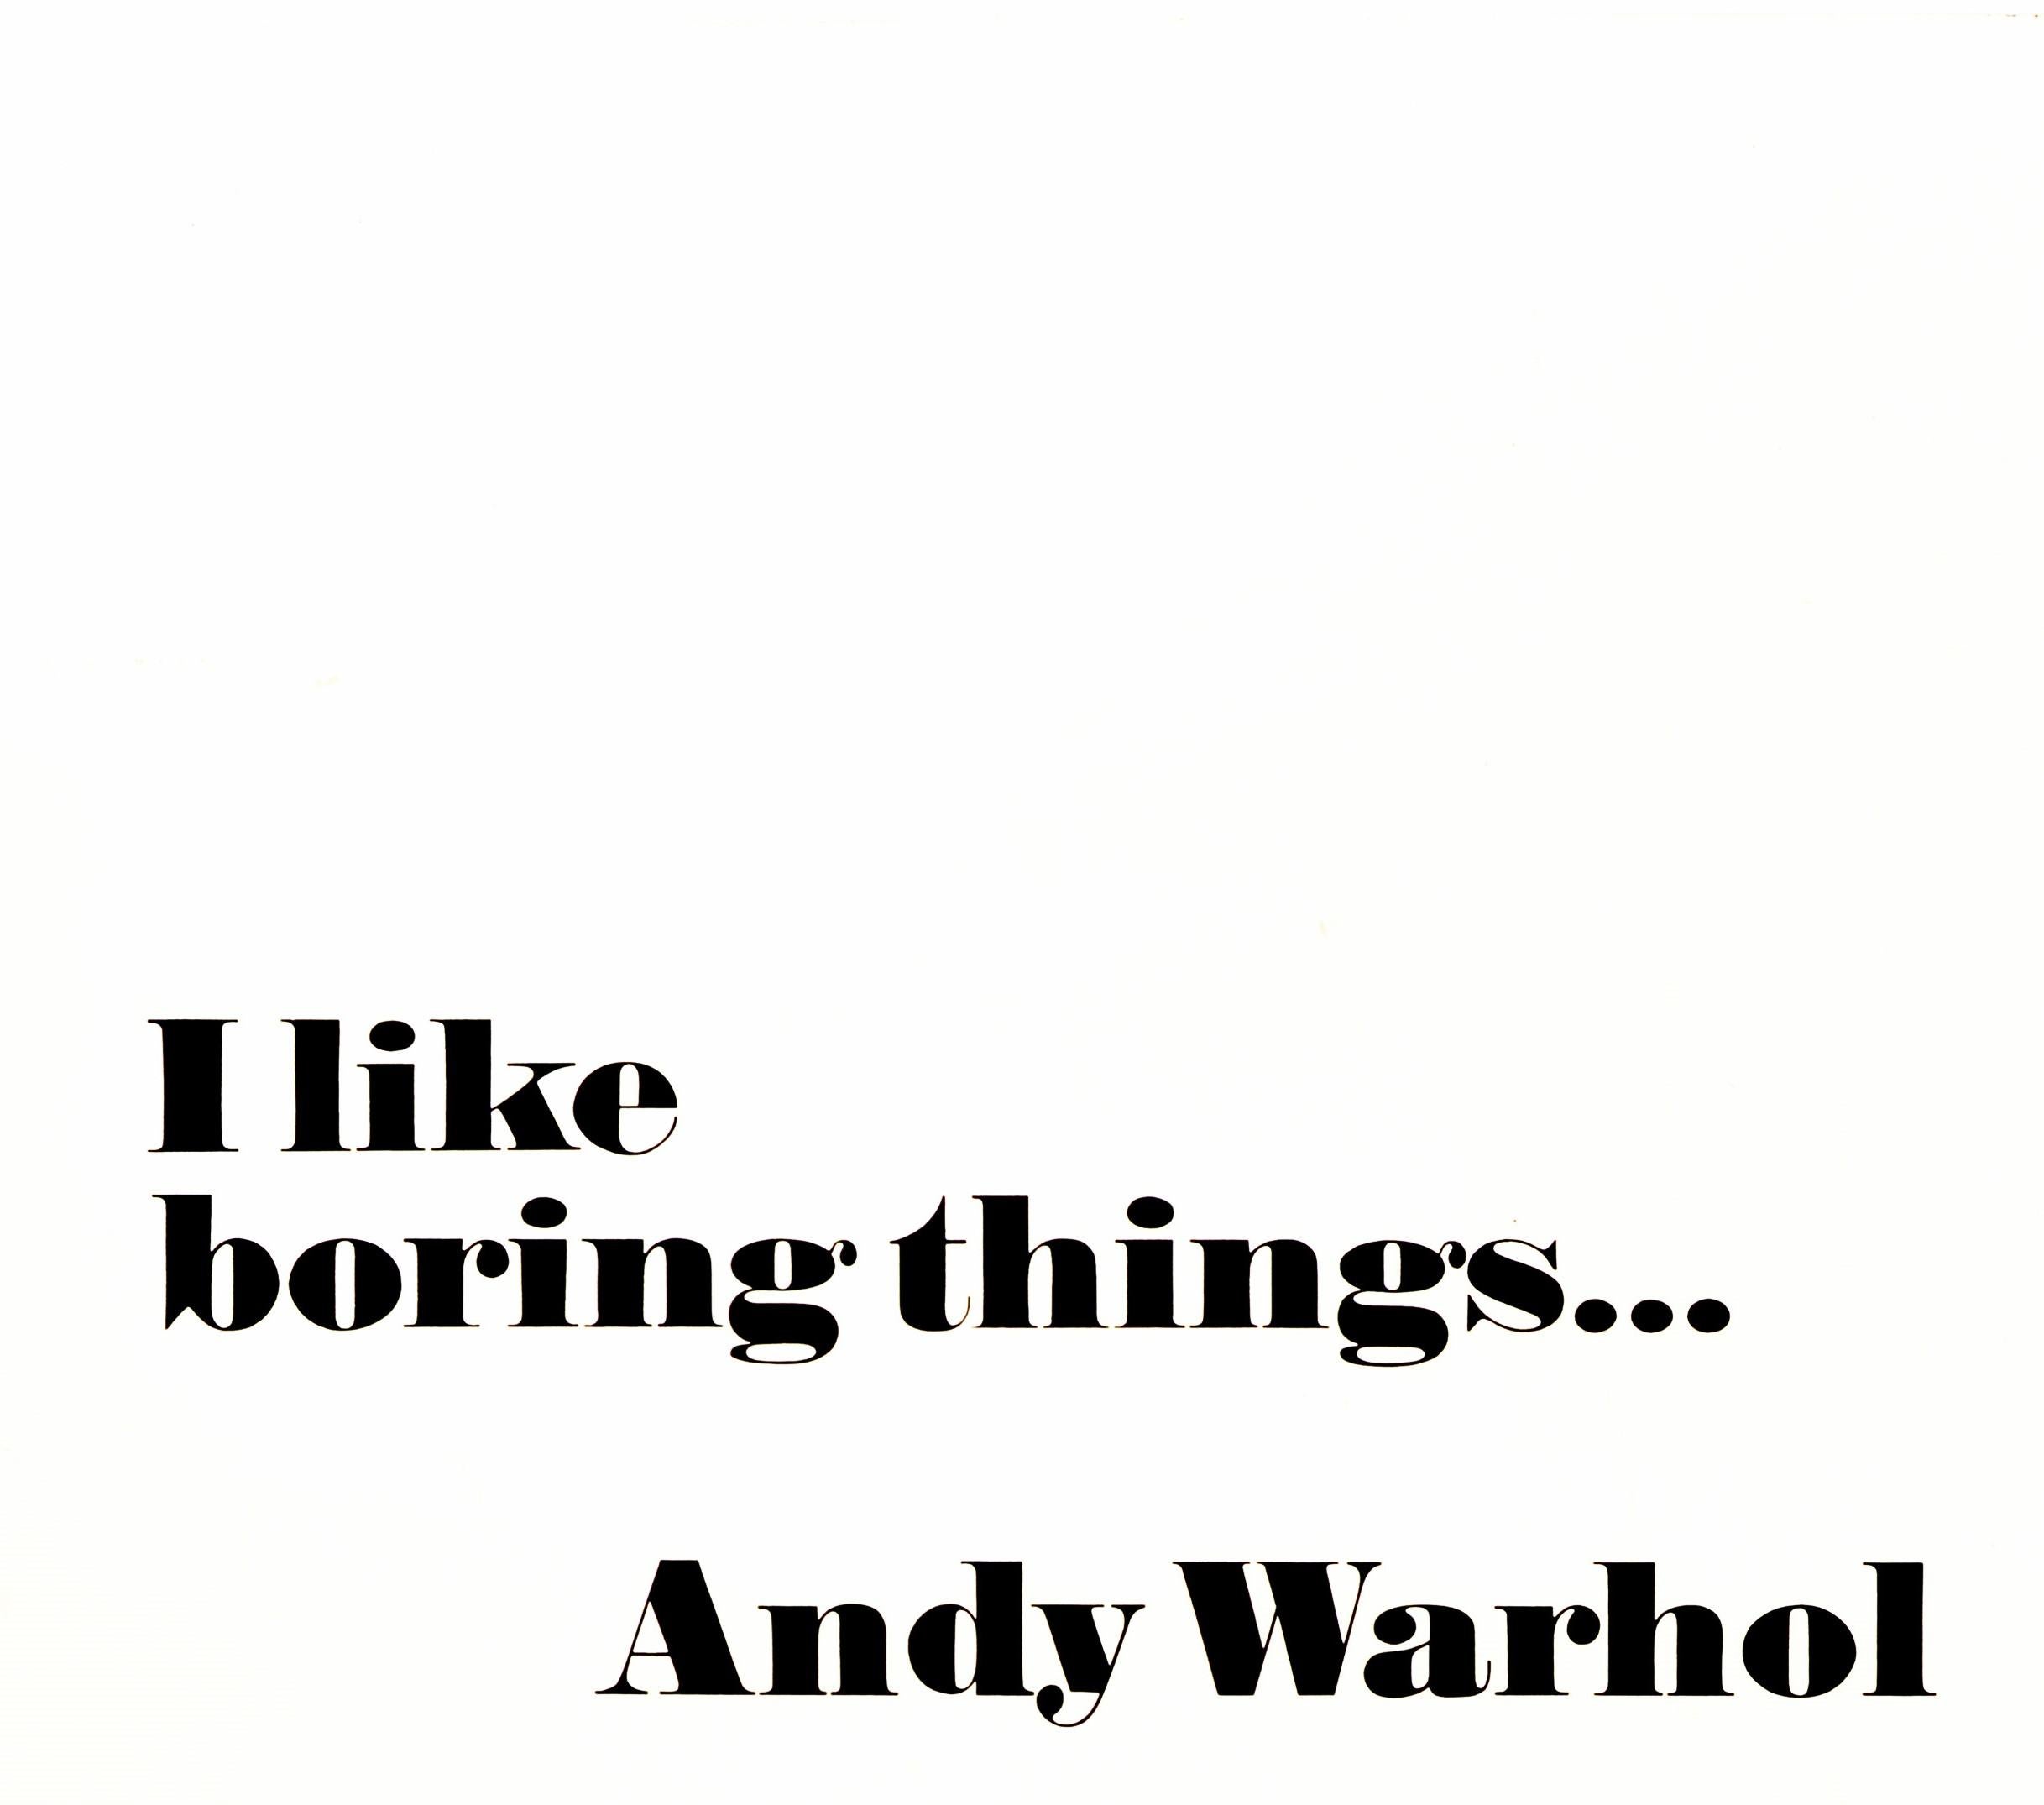 Original vintage advertising poster for Andy Warhol's solo exhibition at the Moderna Museet Stockholm Sweden Museum of Modern Art from 10 February to 17 March 1968 featuring a quote by the artist - I like boring things... Andy Warhol - as a